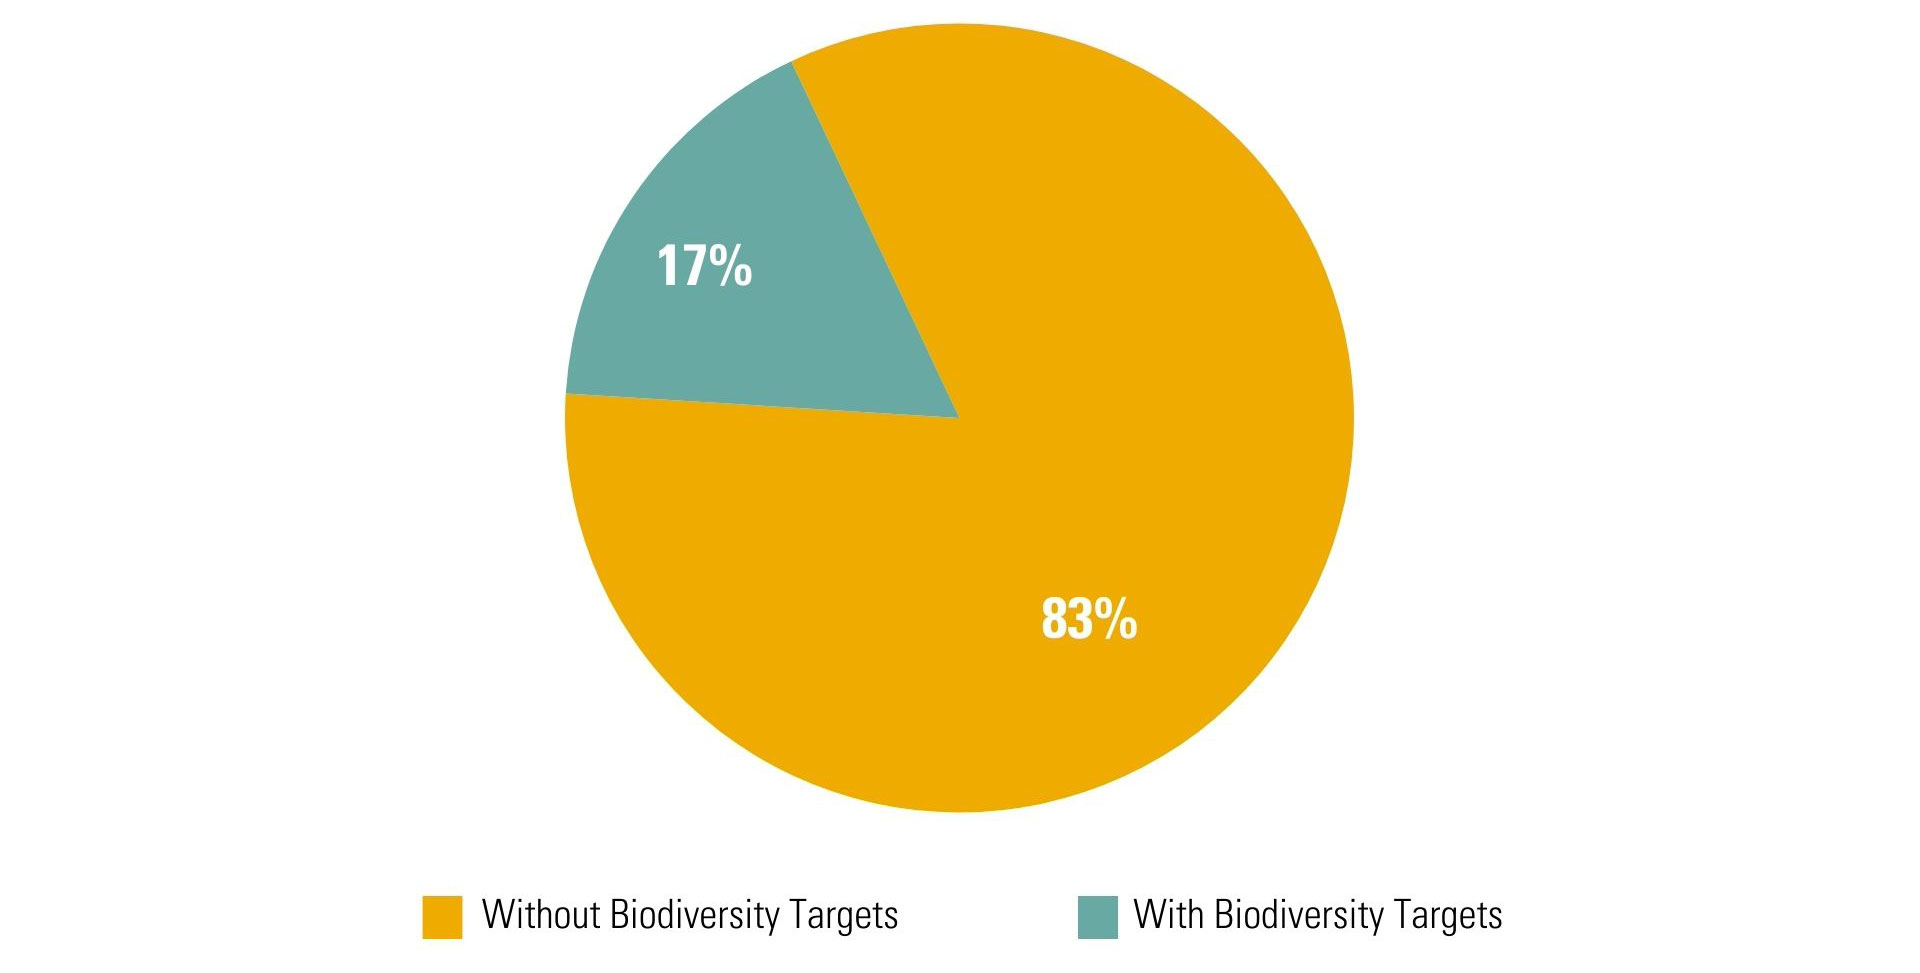 Figure 2 Percentage of Companies With Biodiversity Targets